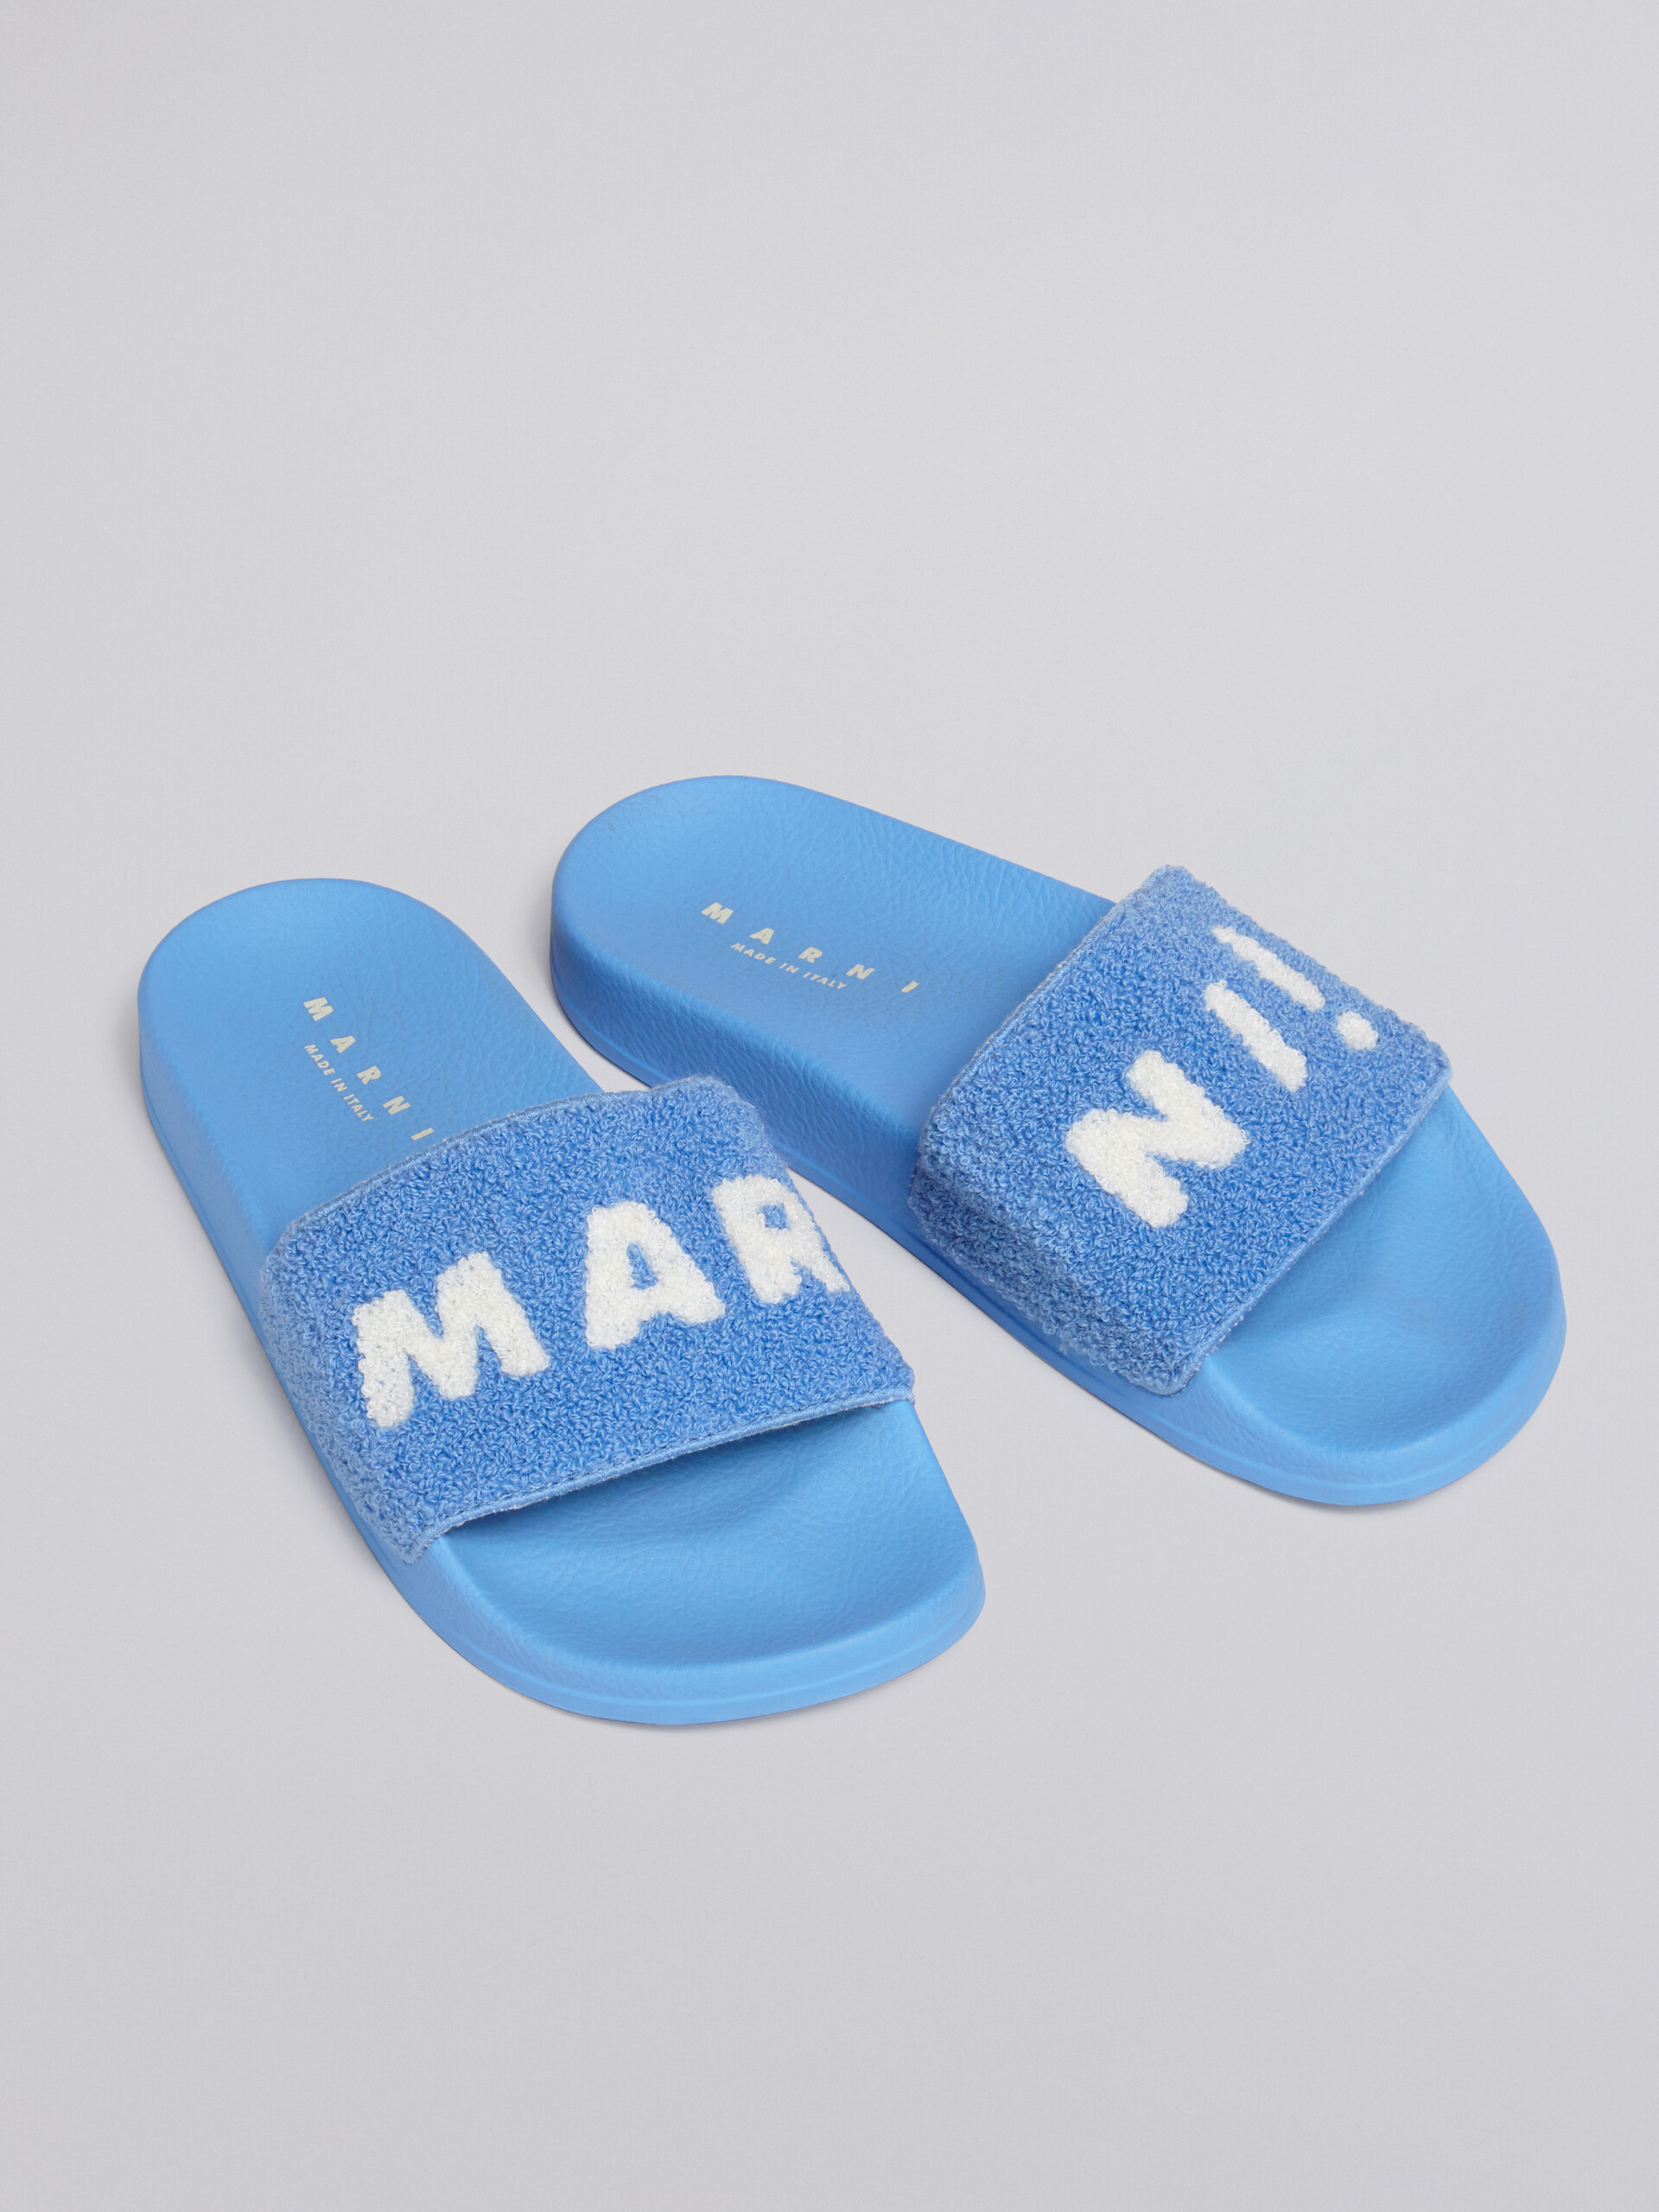 Rubber sandal with blue and white terry cloth upper - Sandals - Image 5